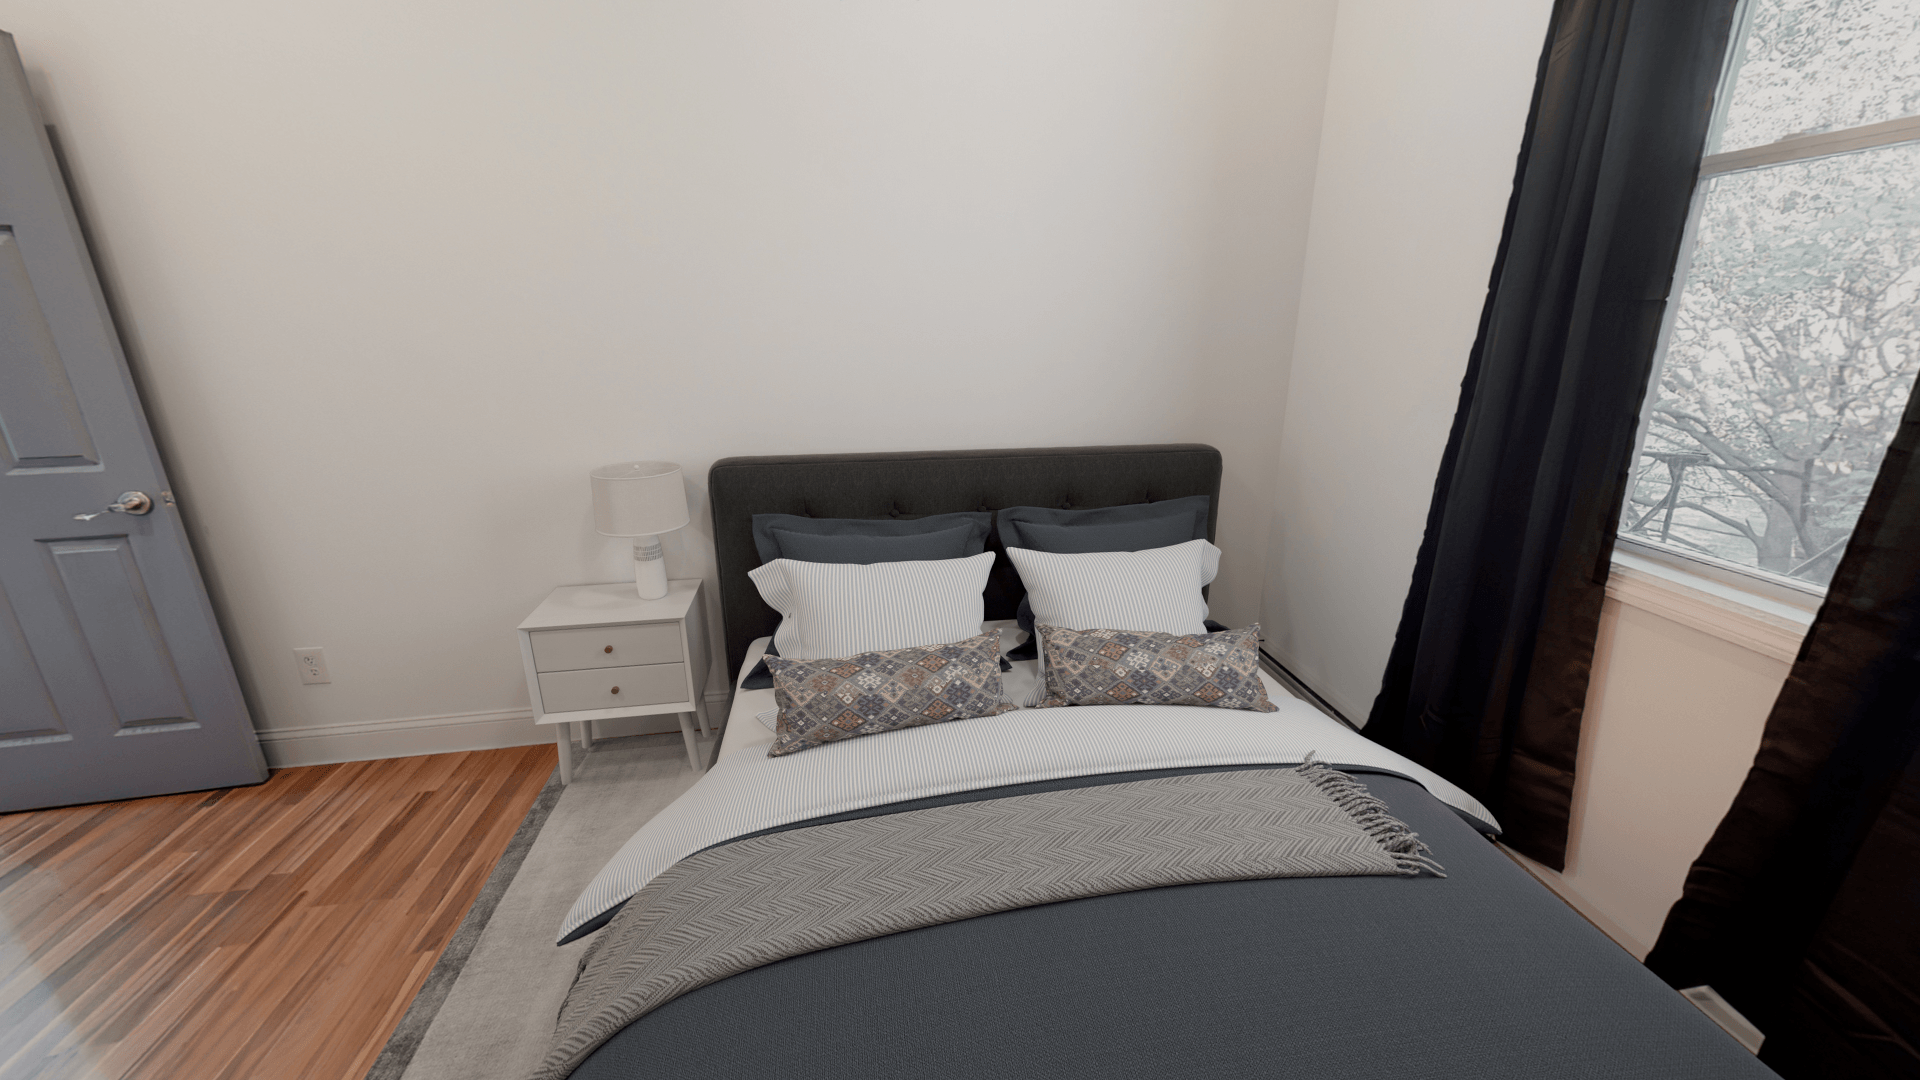 Photo 20 of #1363: Full Bedroom C at June Homes